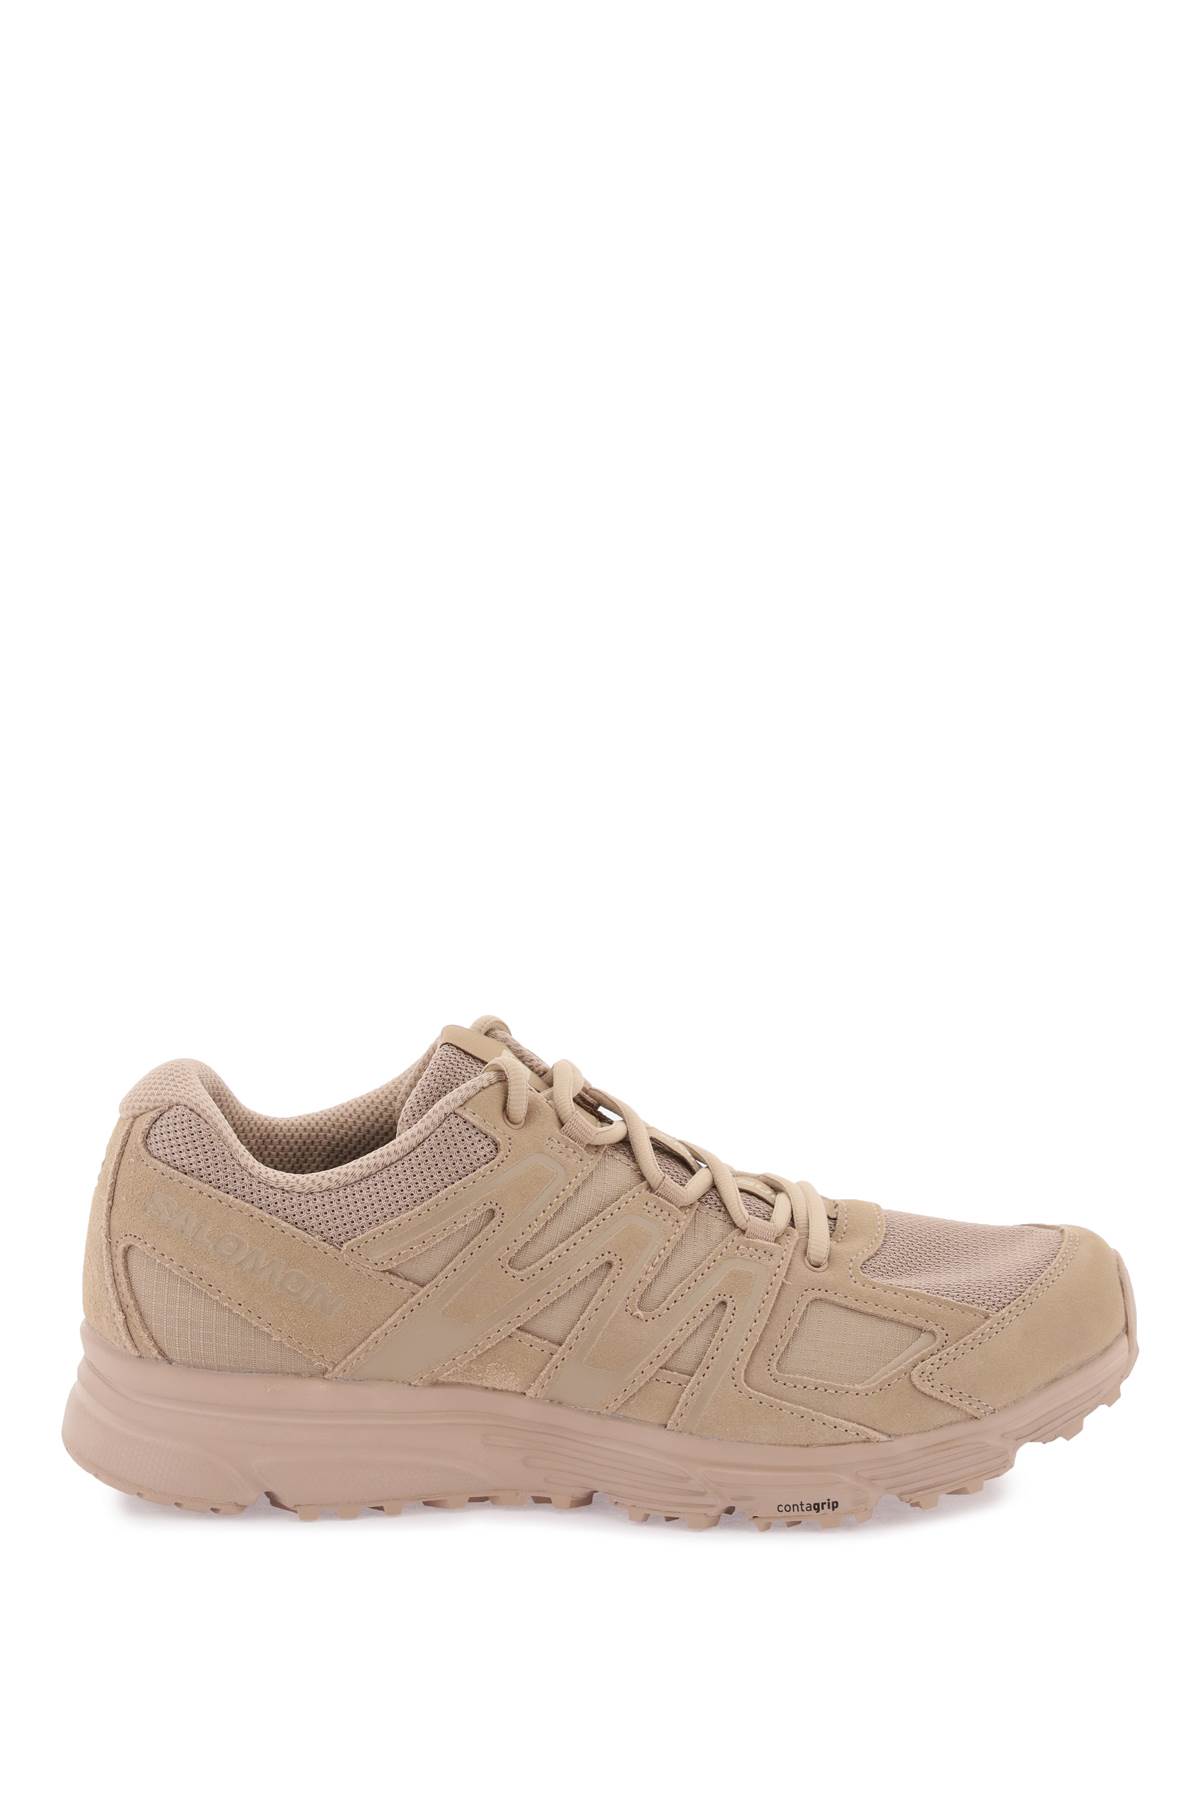 Shop Salomon X-mission 4 Suede Sneakers In Natural Natural Natural (pink)